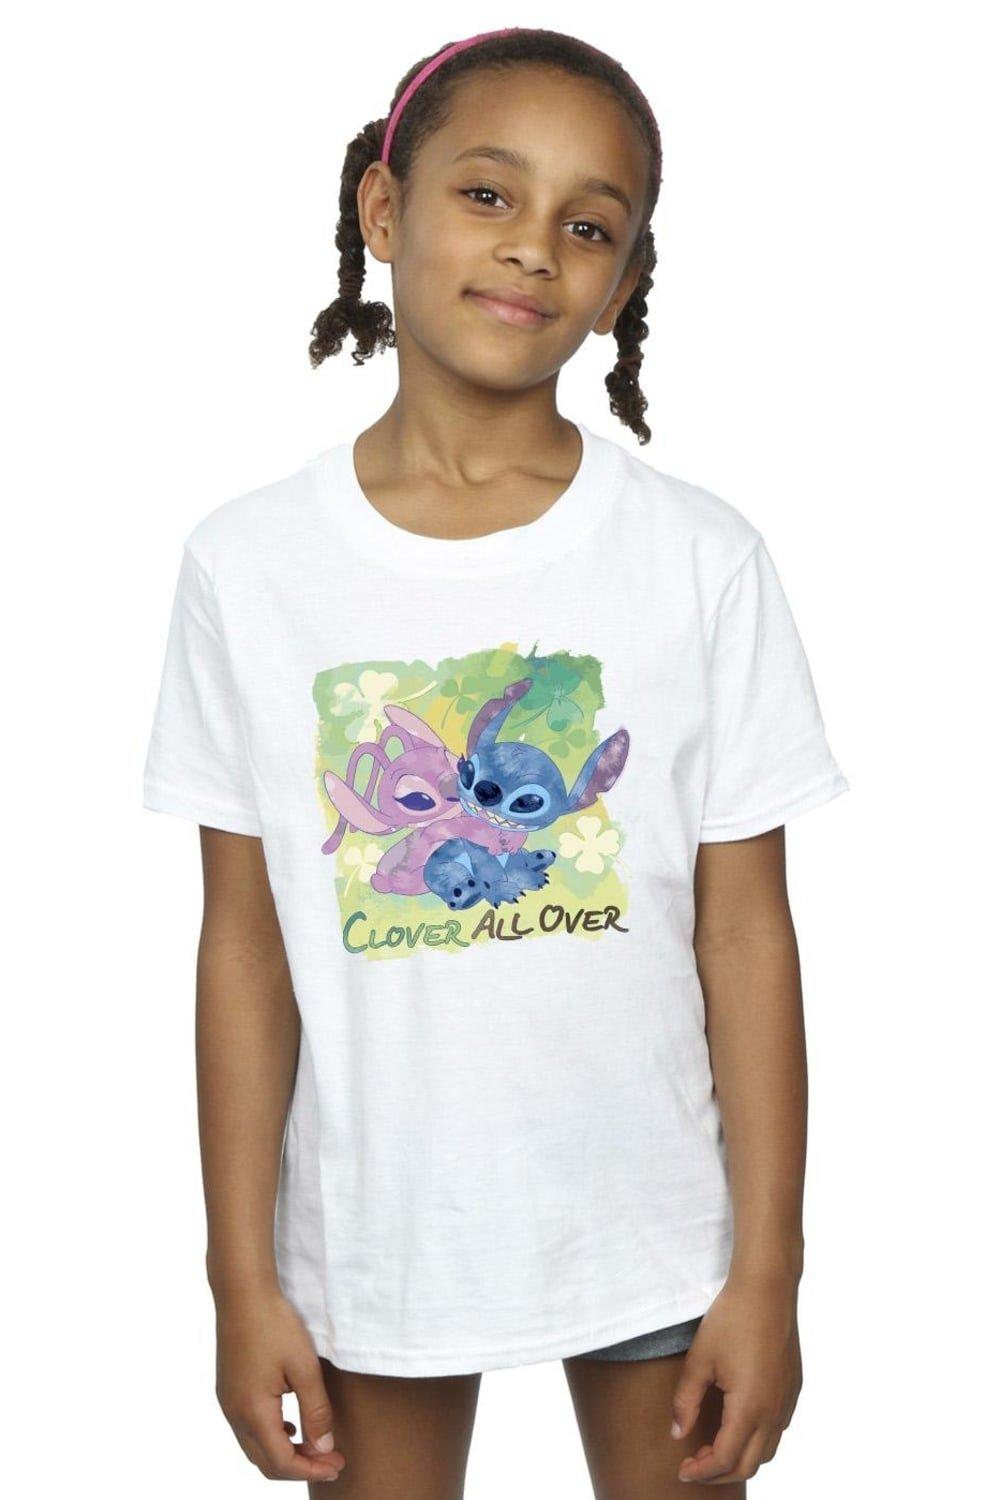 Lilo And Stitch St Patrick’s Day Clover Cotton T-Shirt